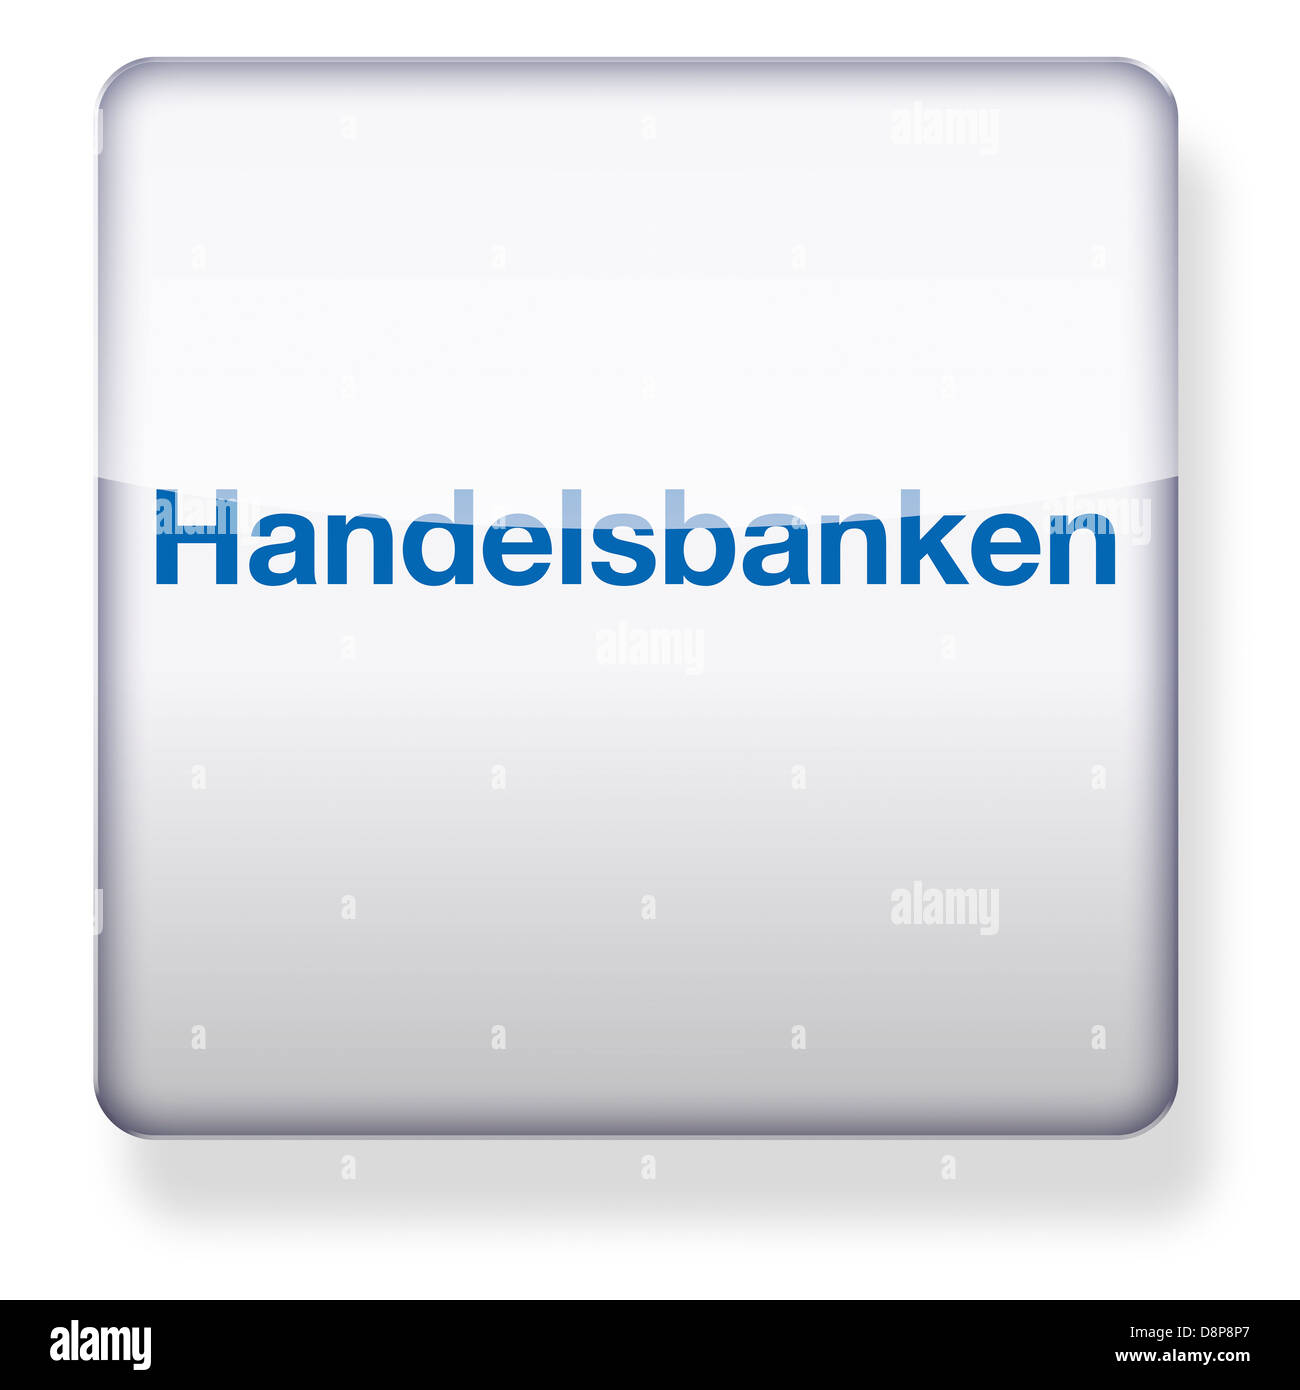 Handelsbanken logo as an app icon. Clipping path included. Stock Photo